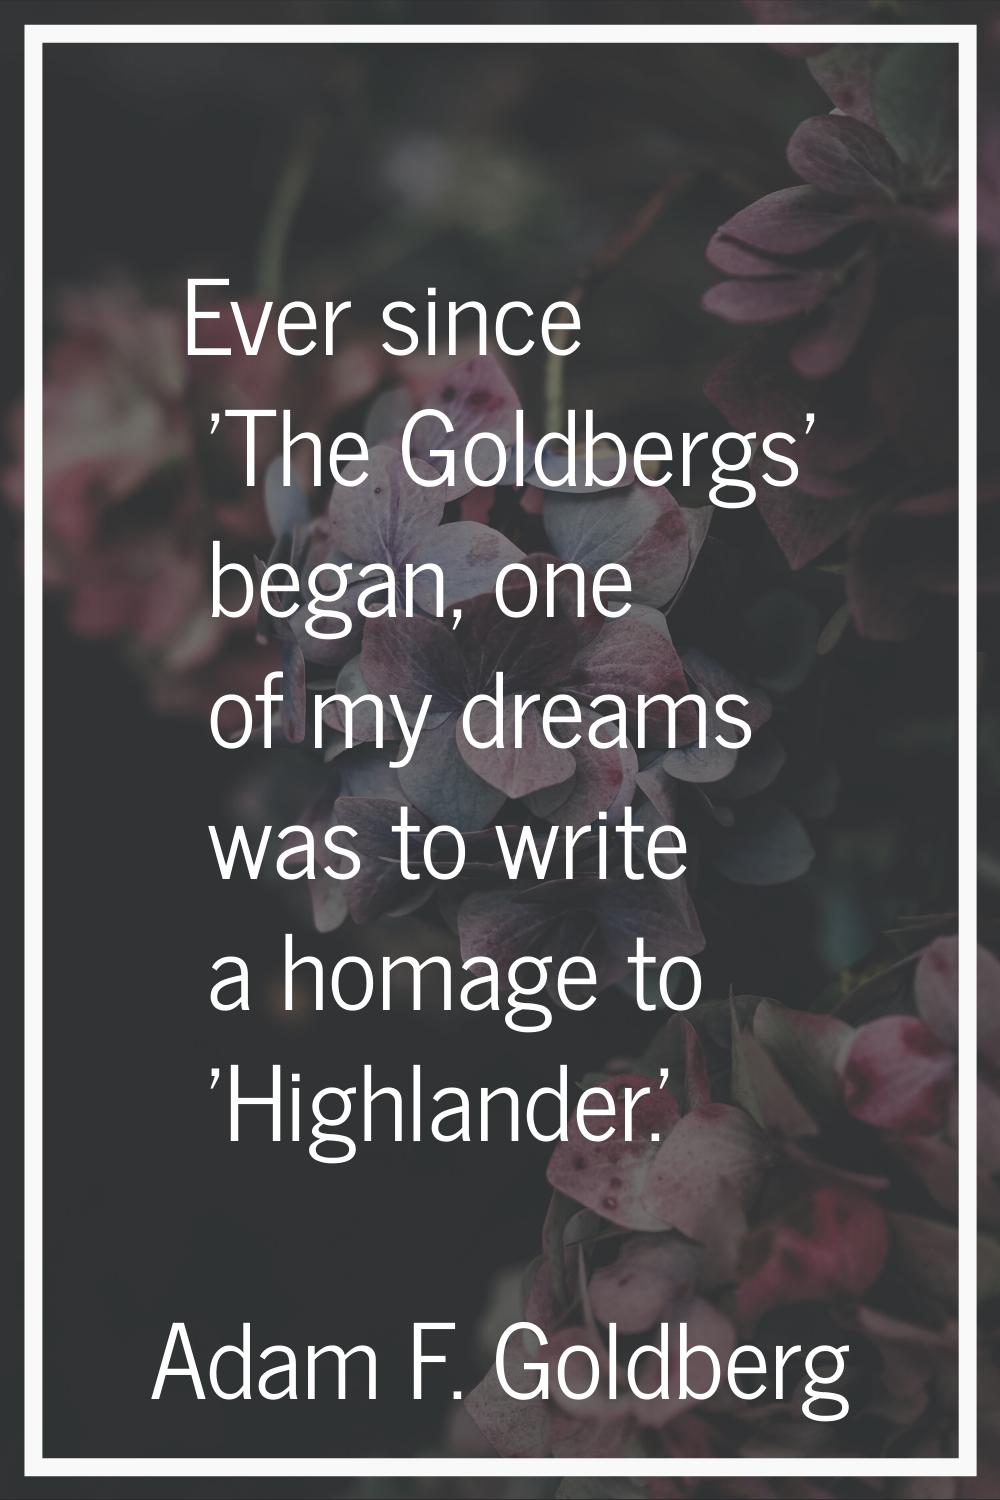 Ever since 'The Goldbergs' began, one of my dreams was to write a homage to 'Highlander.'